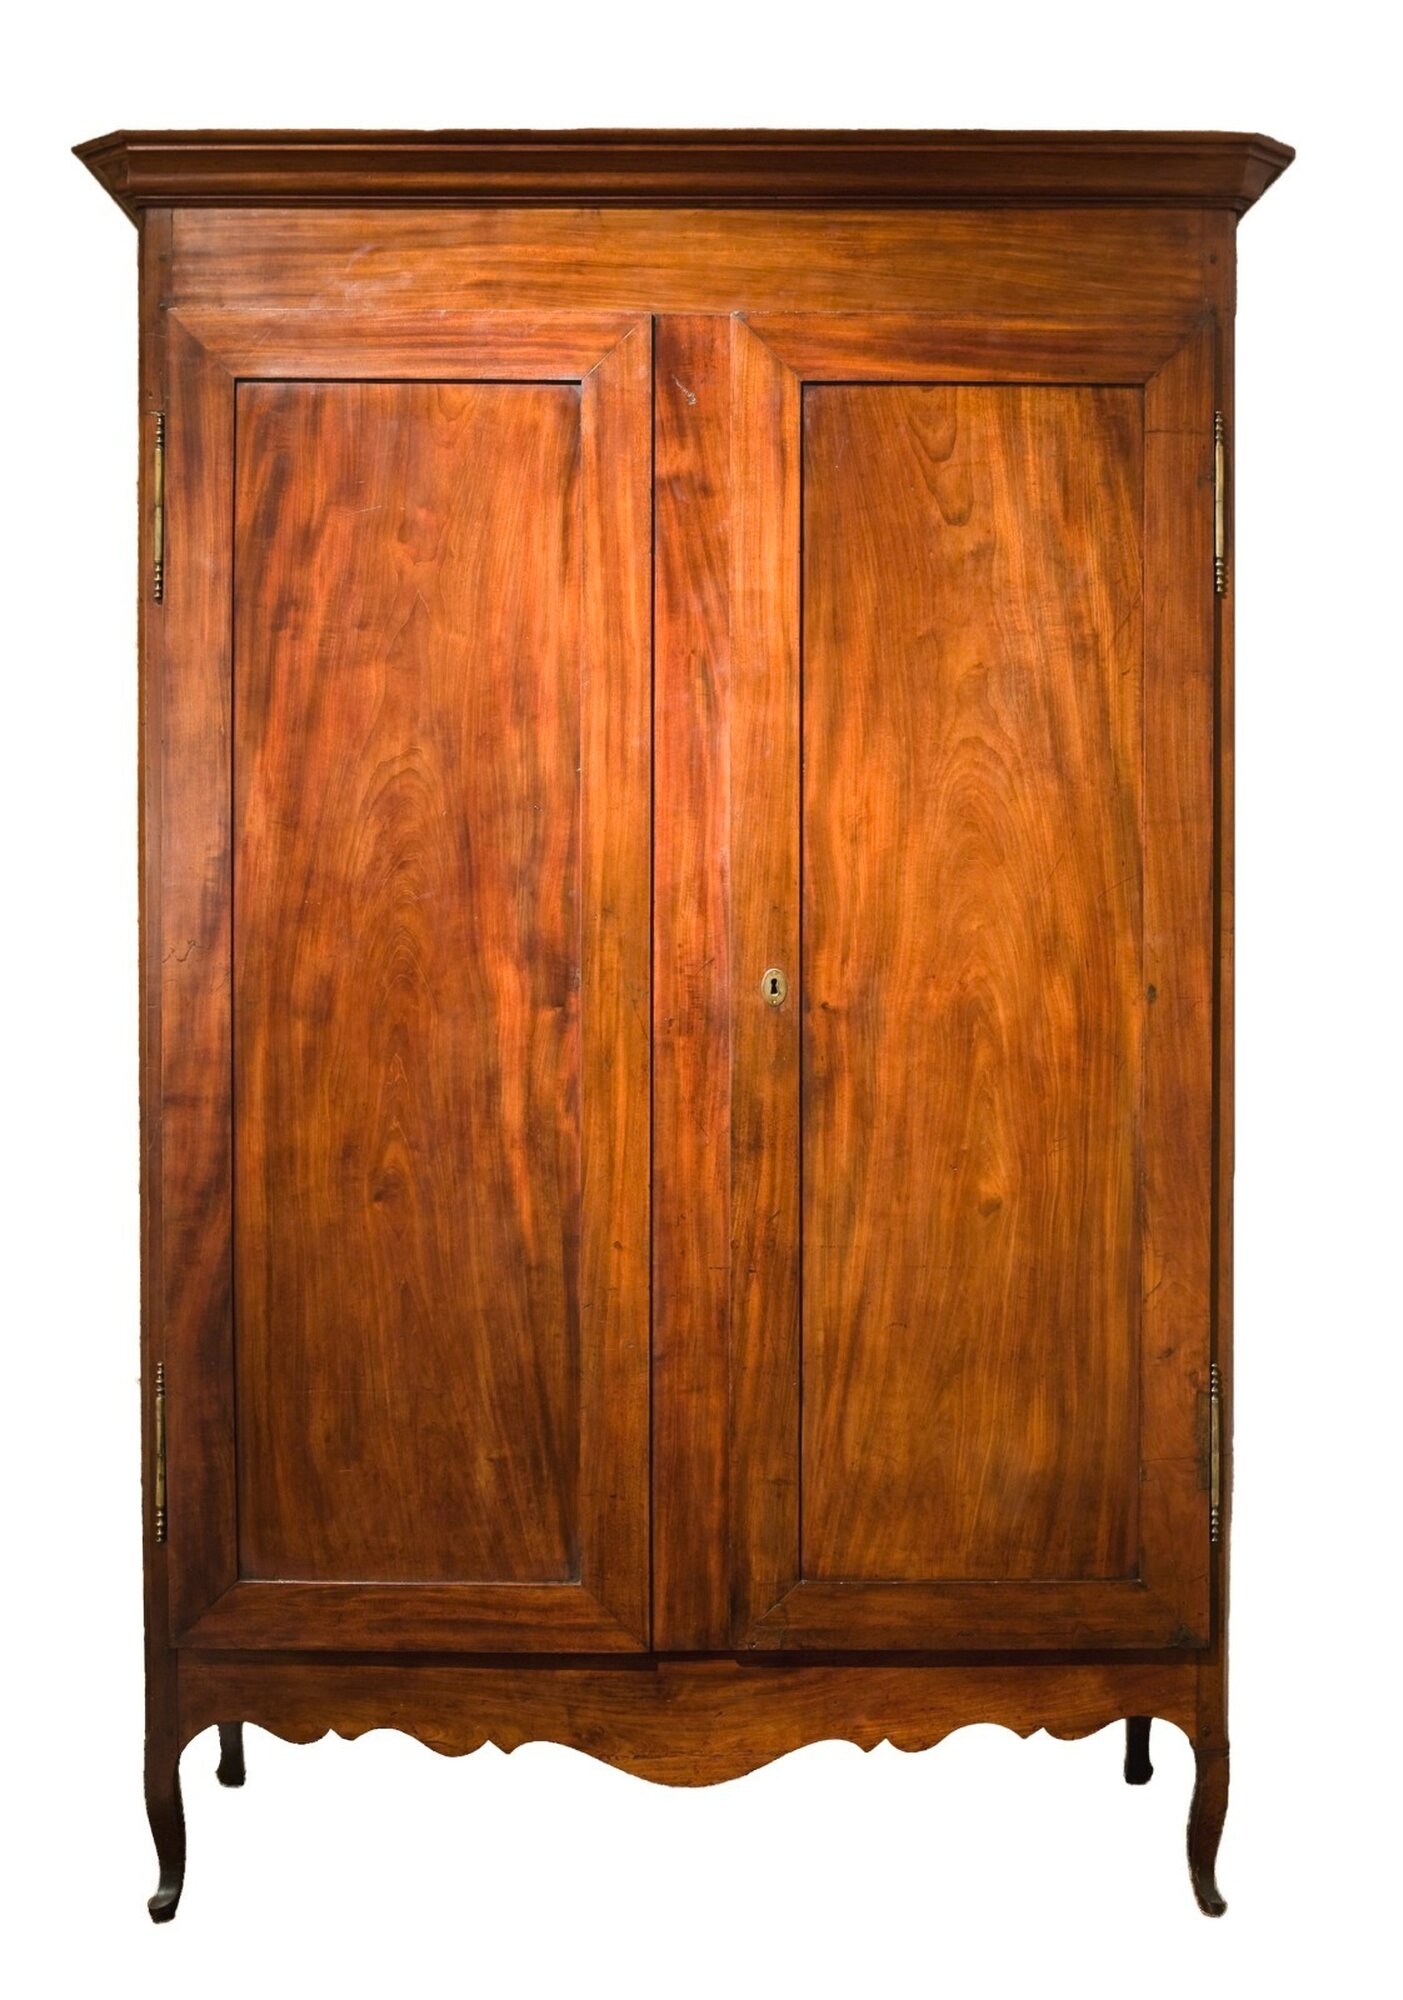 Armoire; between 1790 and 1815,